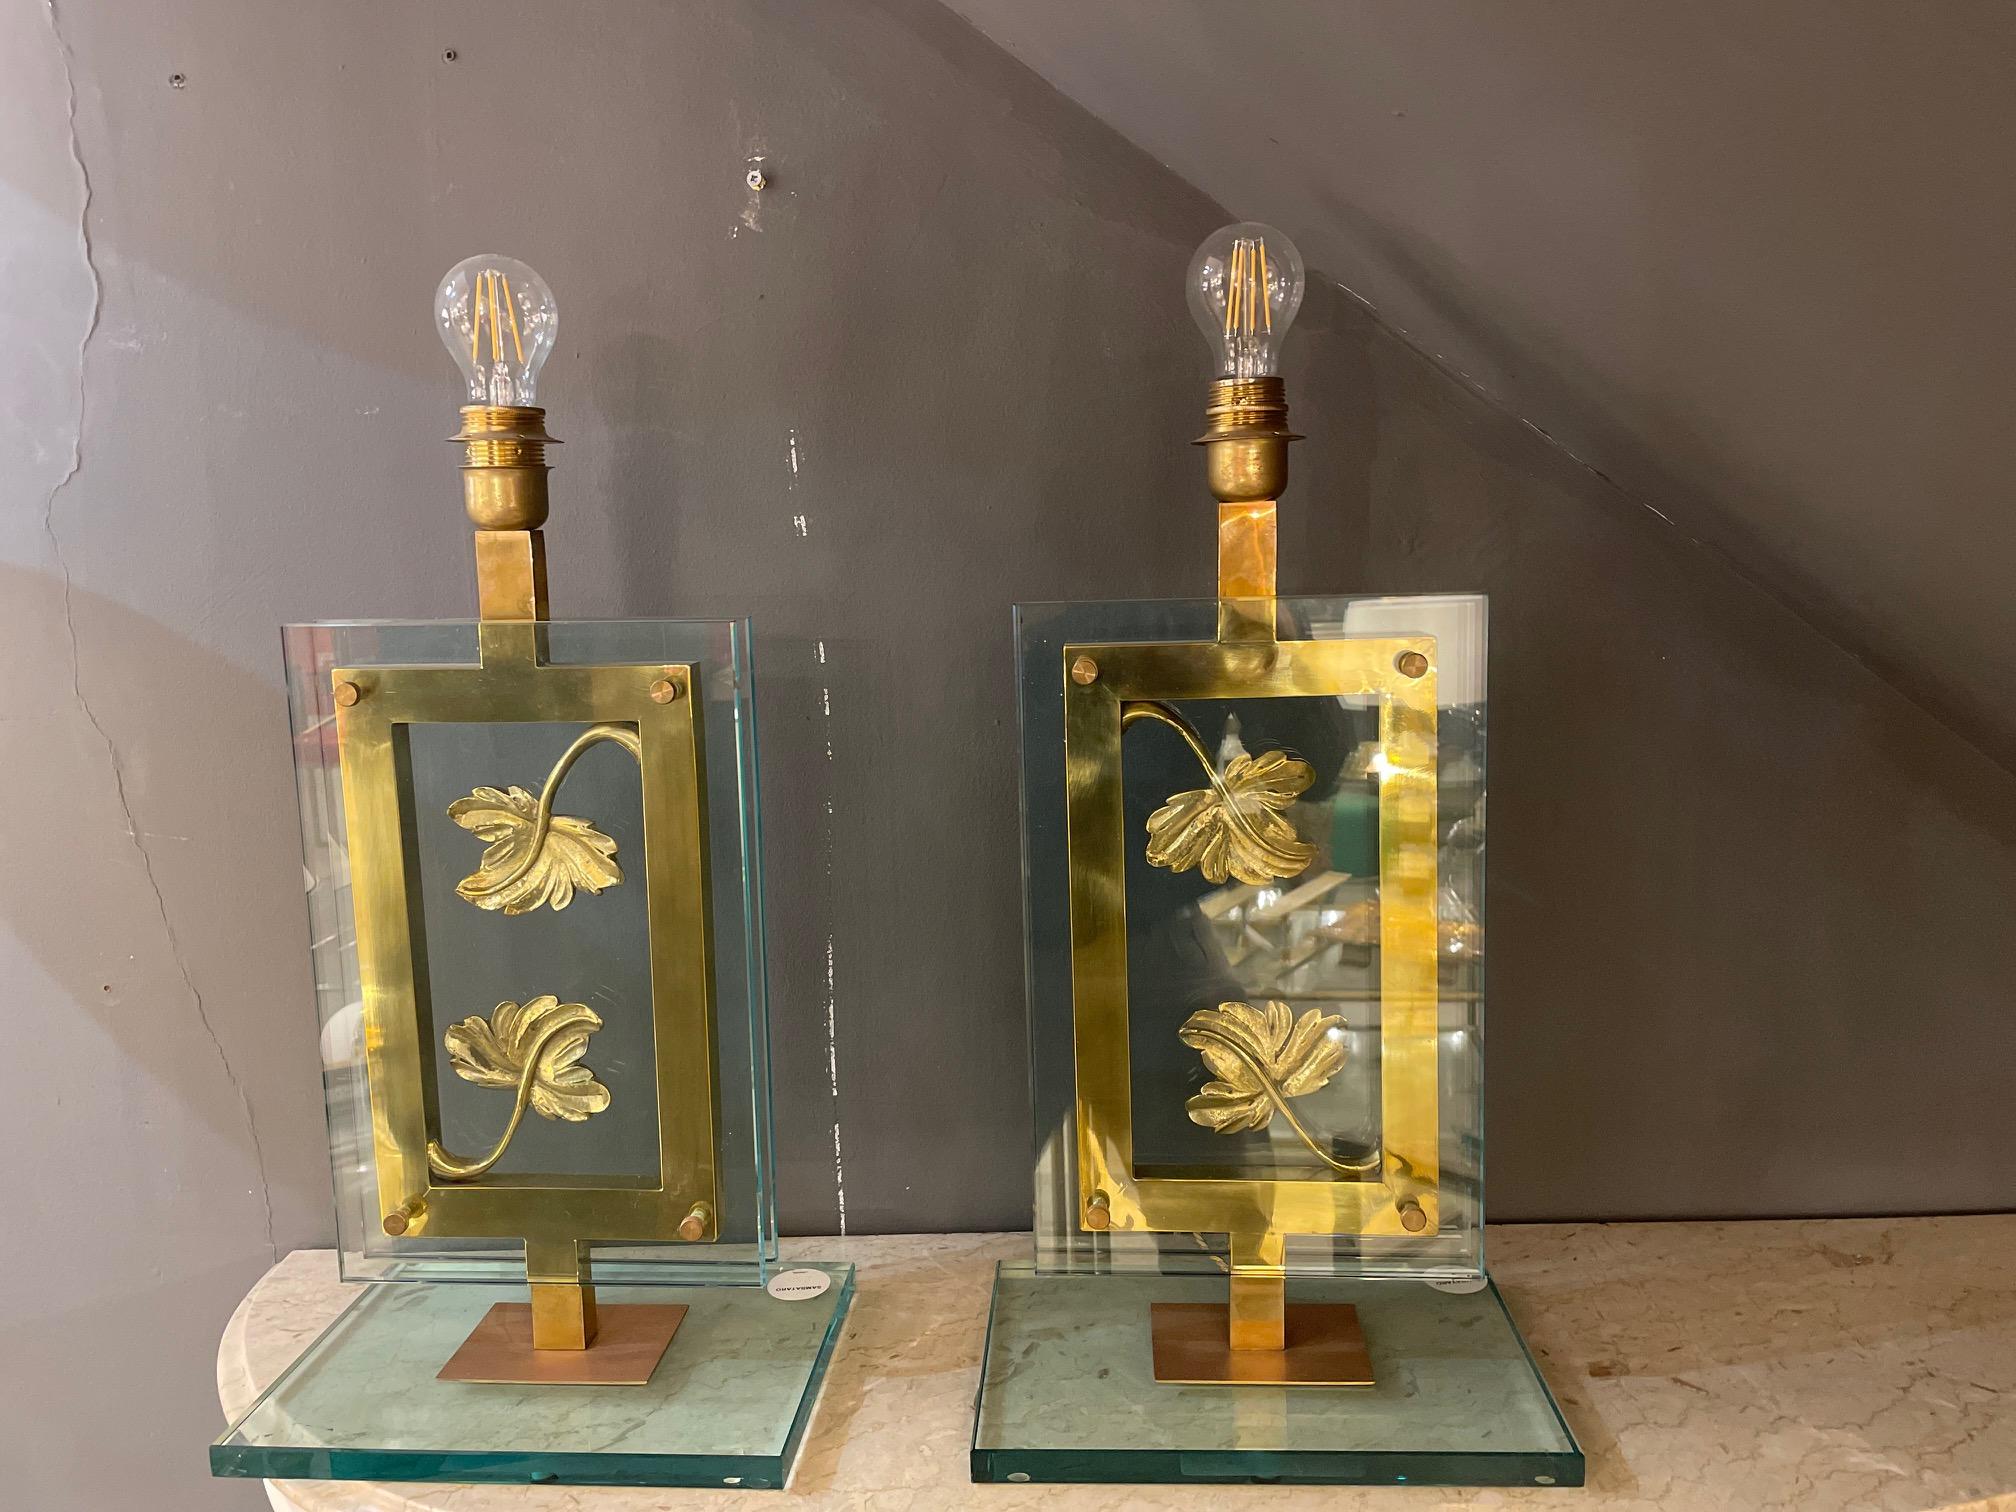 A pair of Italian artistic table lamps in brass and glass. The centre of the lamp supports two floating cast bronze leaves encased by rectangular glass on both t front and back of the lamp creating a framed foliage art piece.